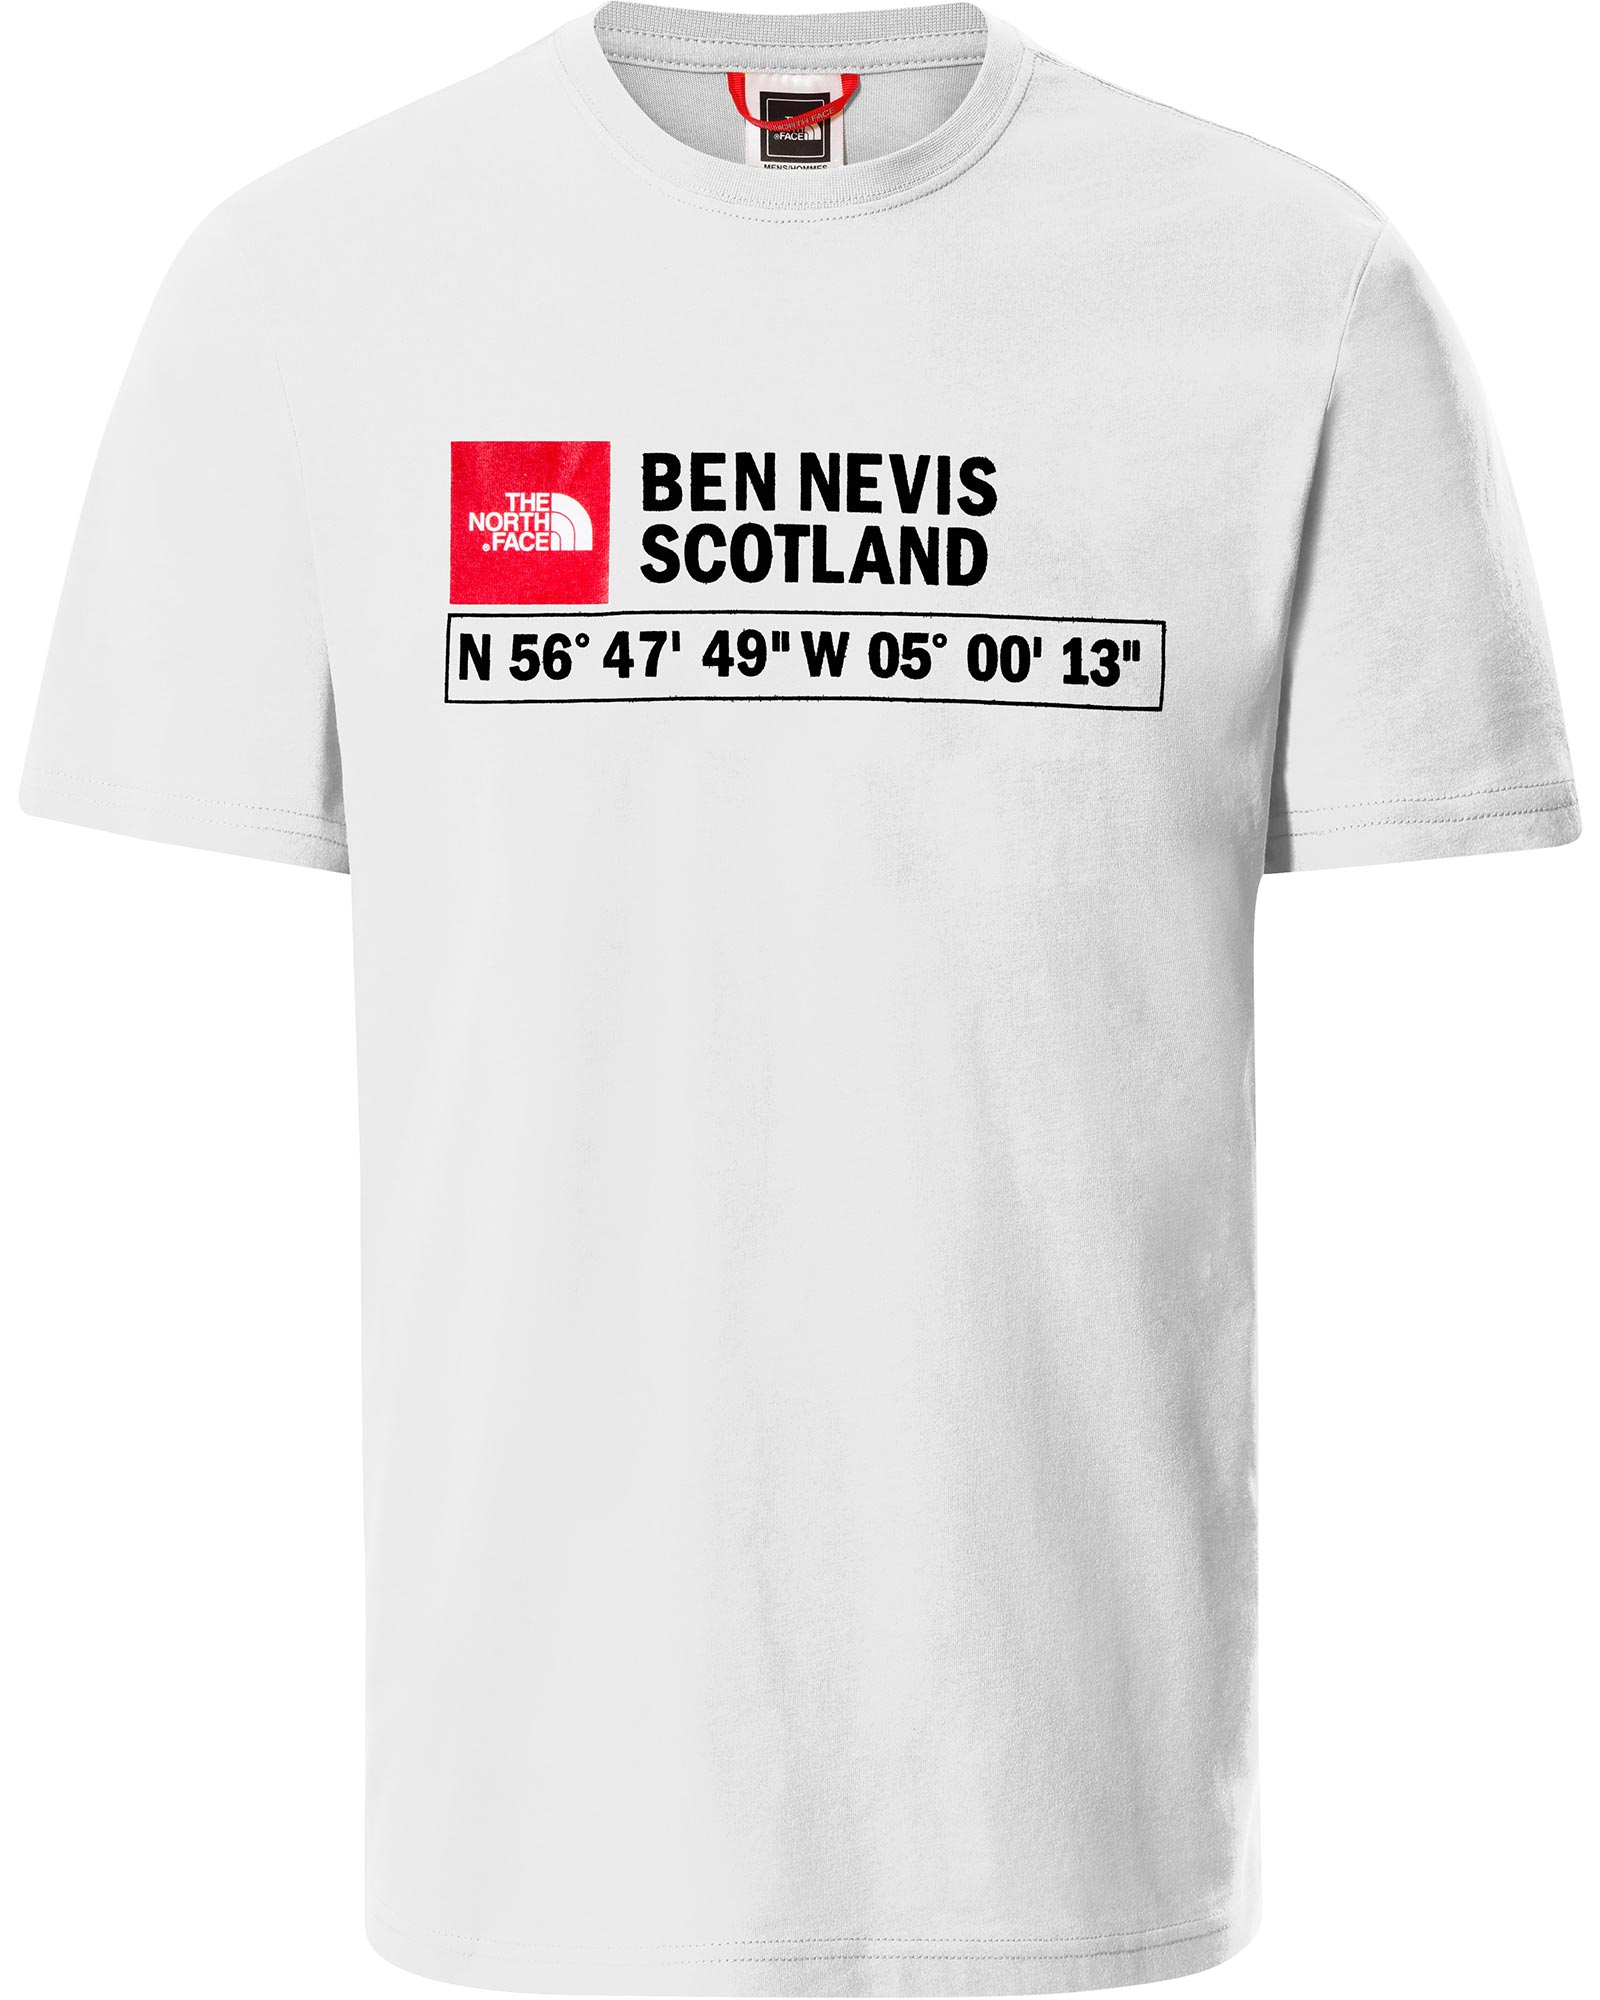 Product image of The North Face Ben Nevis GPS Logo Men's T-Shirt